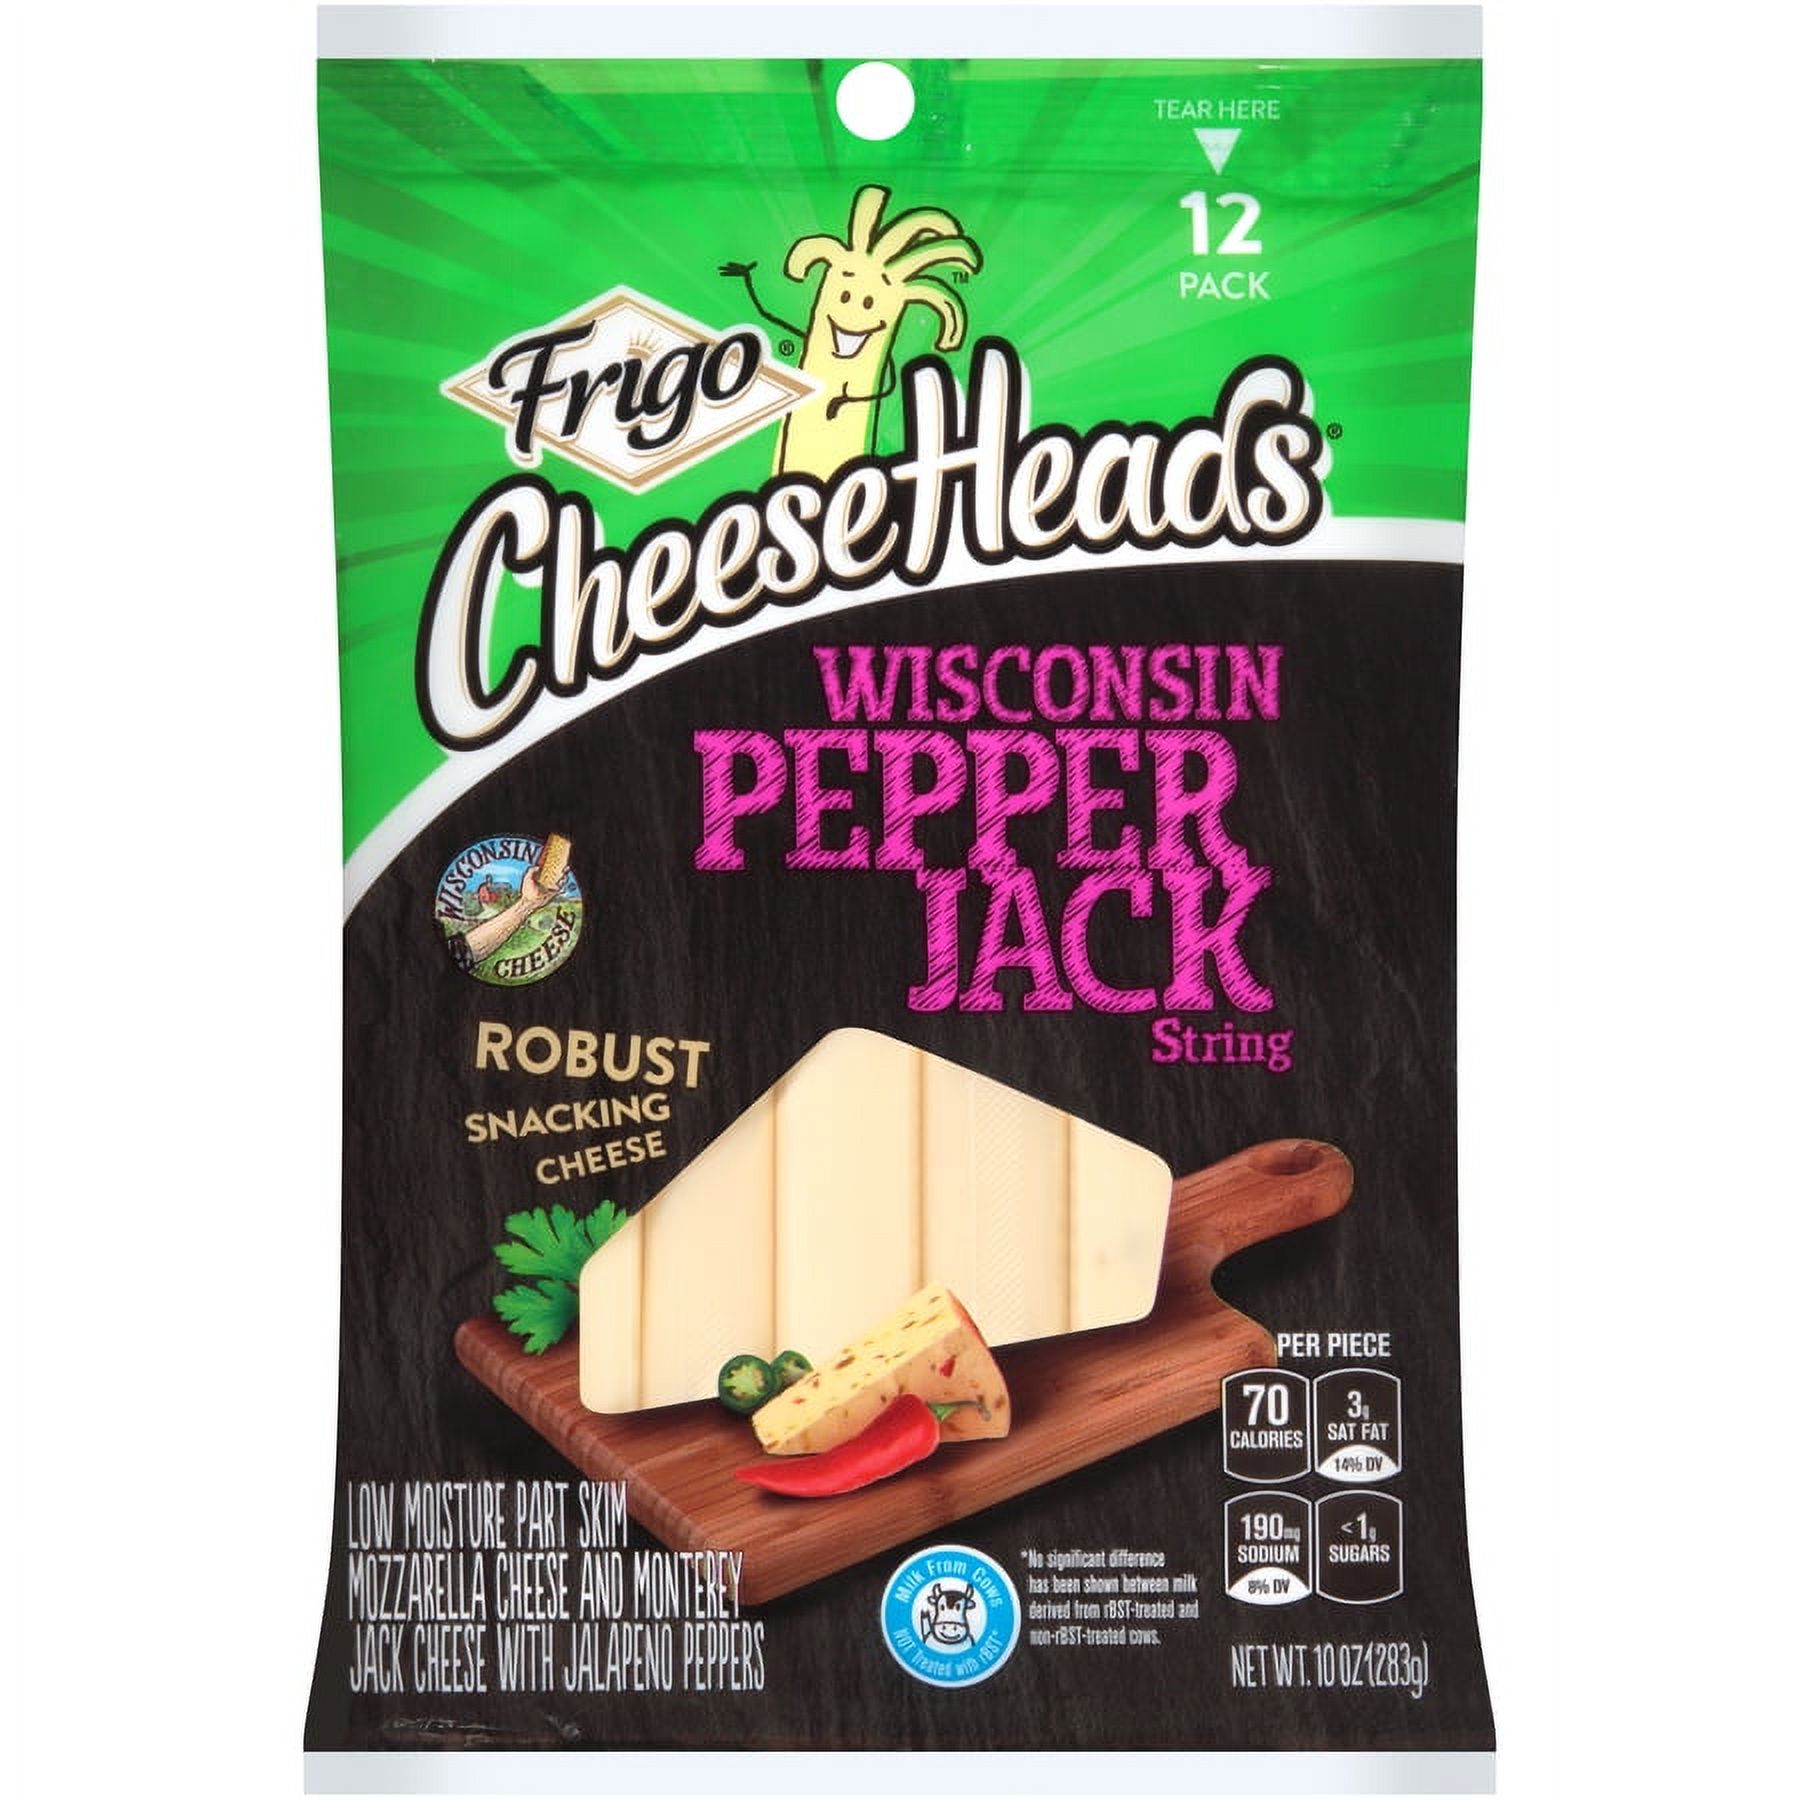 Frigo Cheese Heads Premium Snacking Pepper Jack Natural String Cheese, 0.83 oz, 12 ct - image 1 of 3